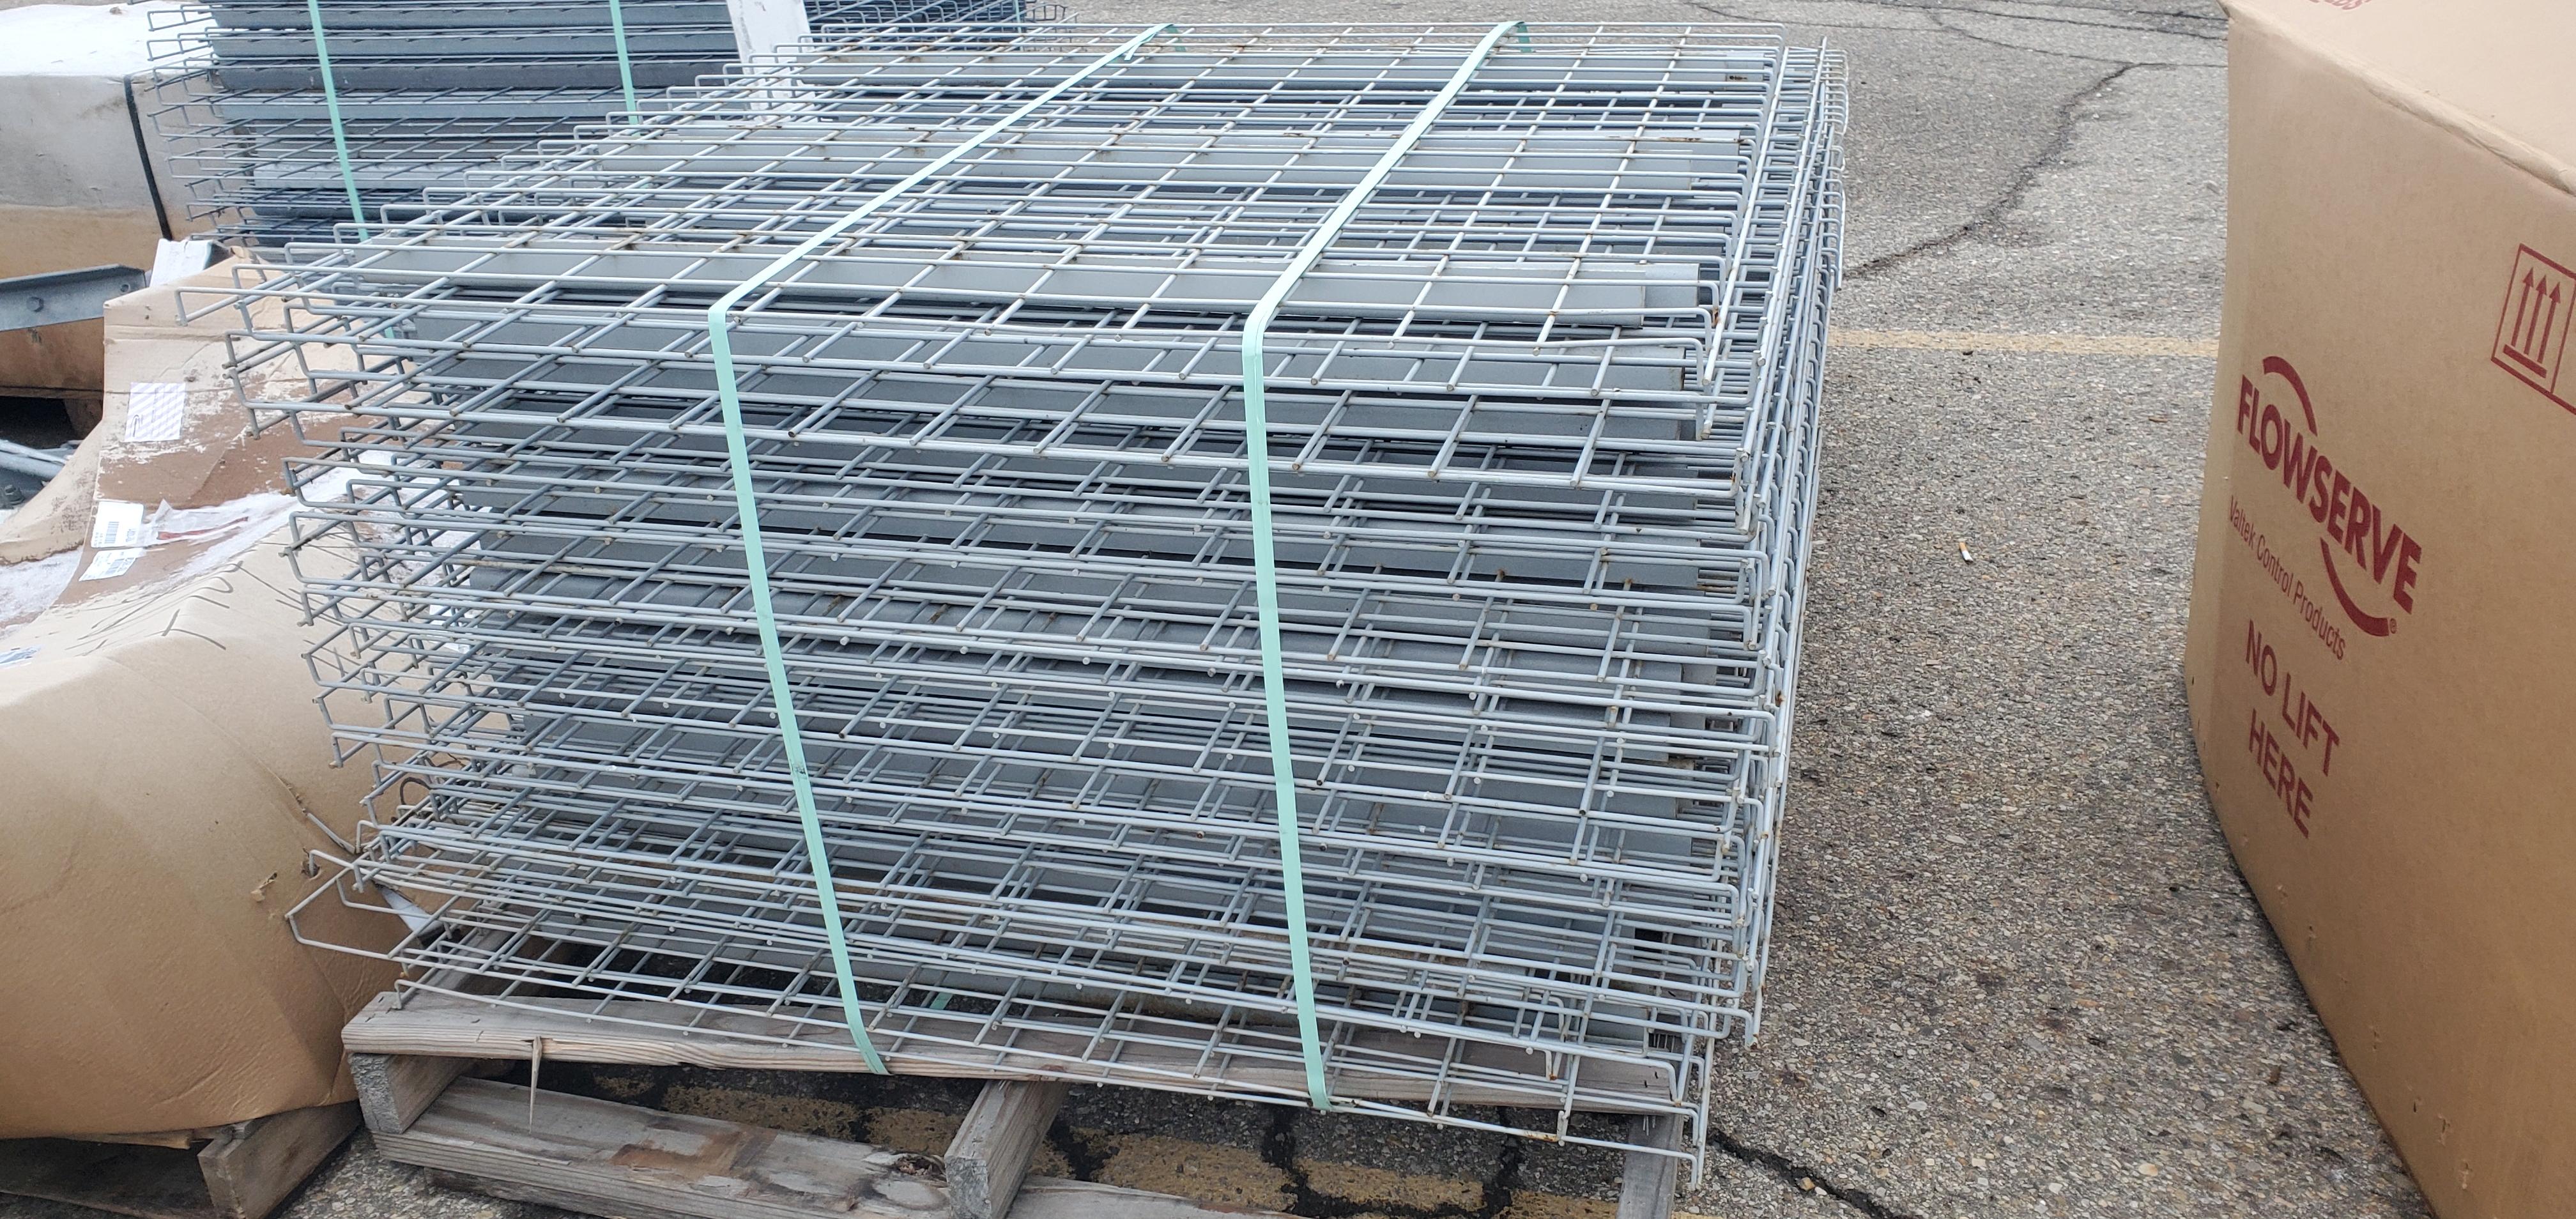 Lot of 28 Used Pallet Racking Grates. 56